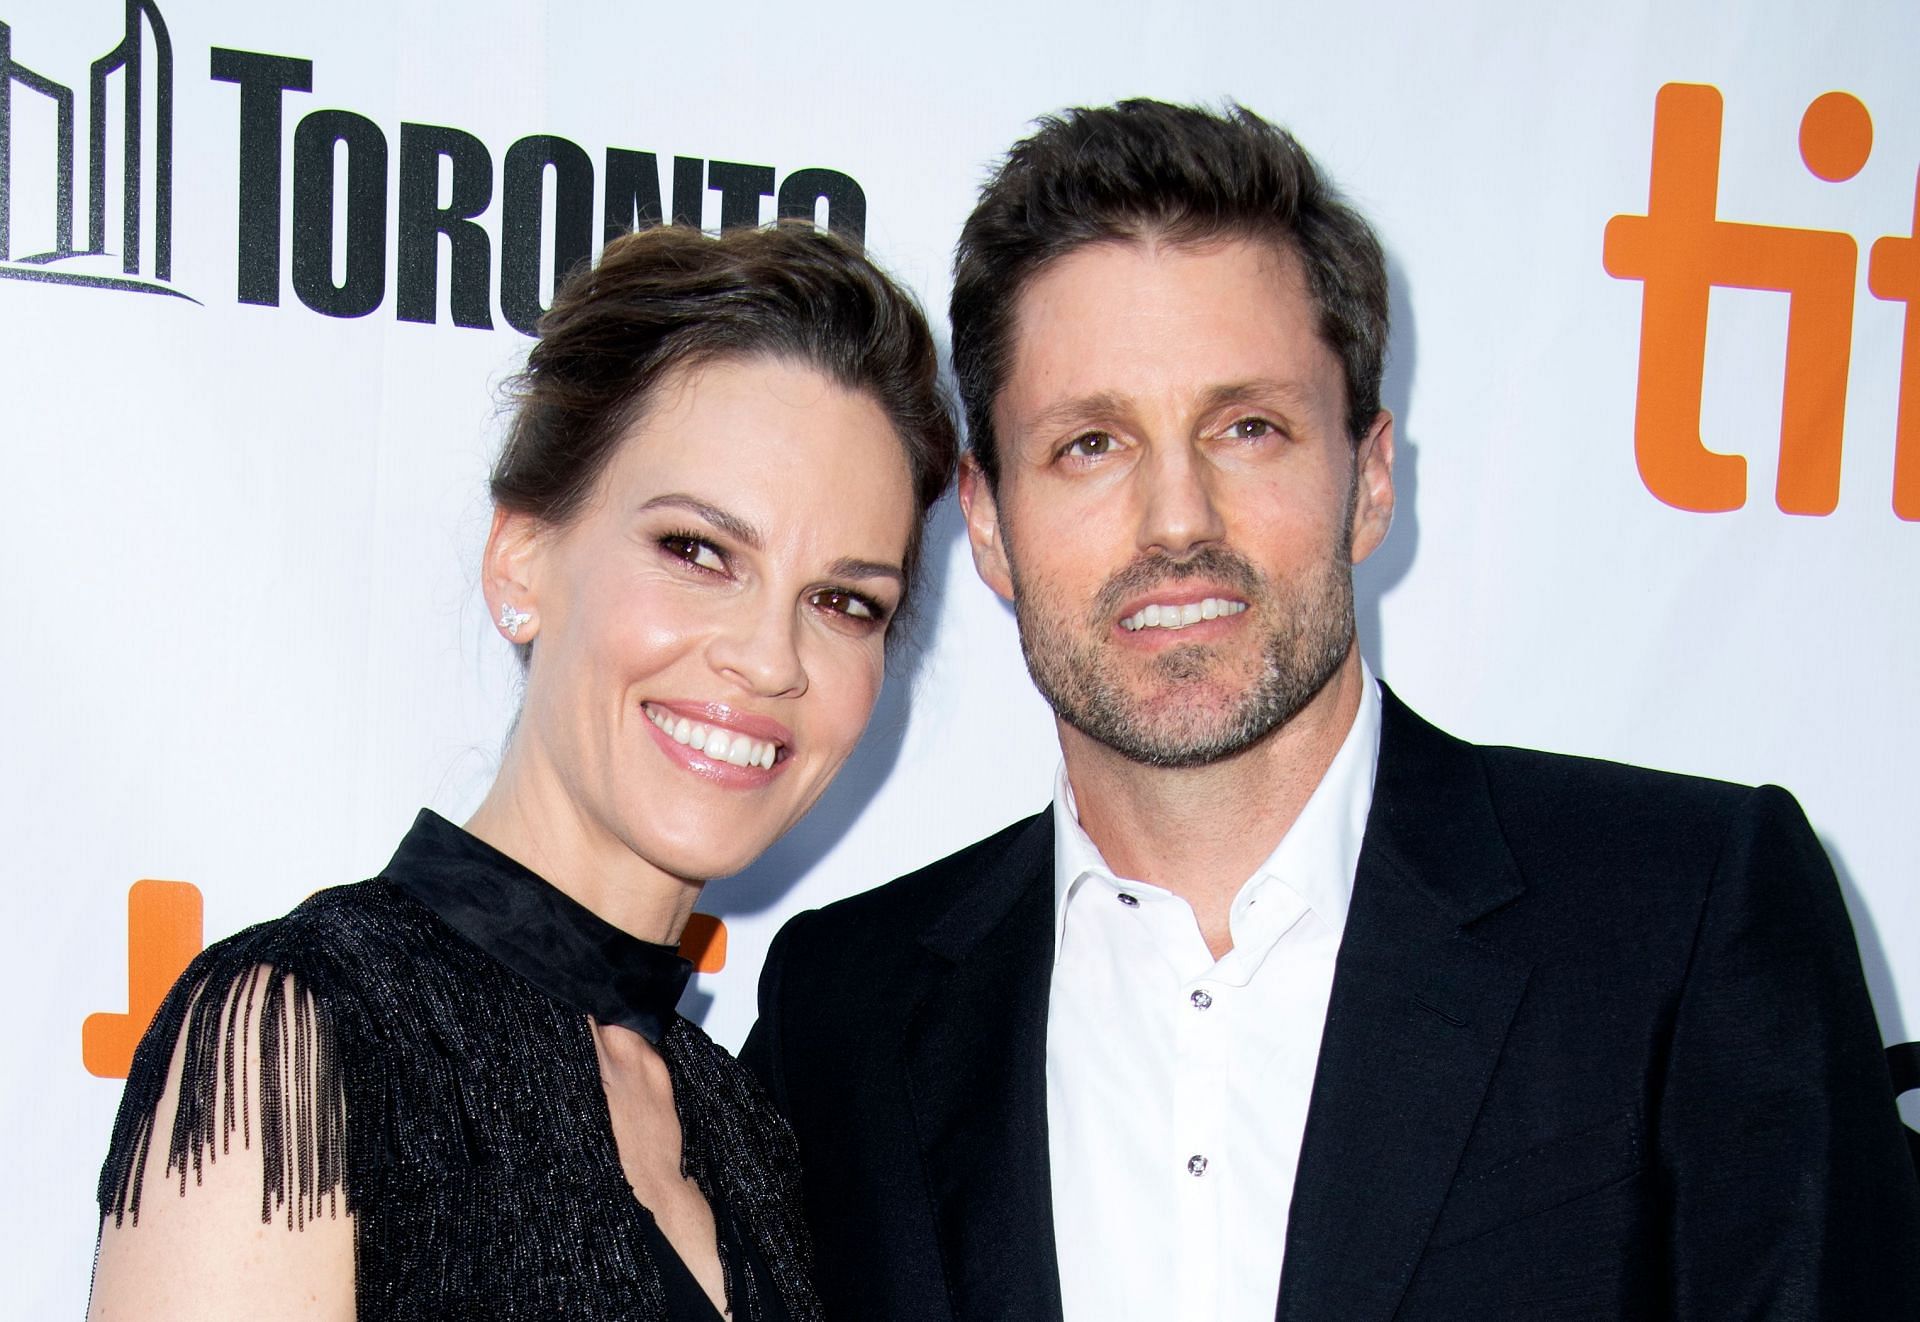 Hilary Swank and Philip Schneider (image via Getty Images)